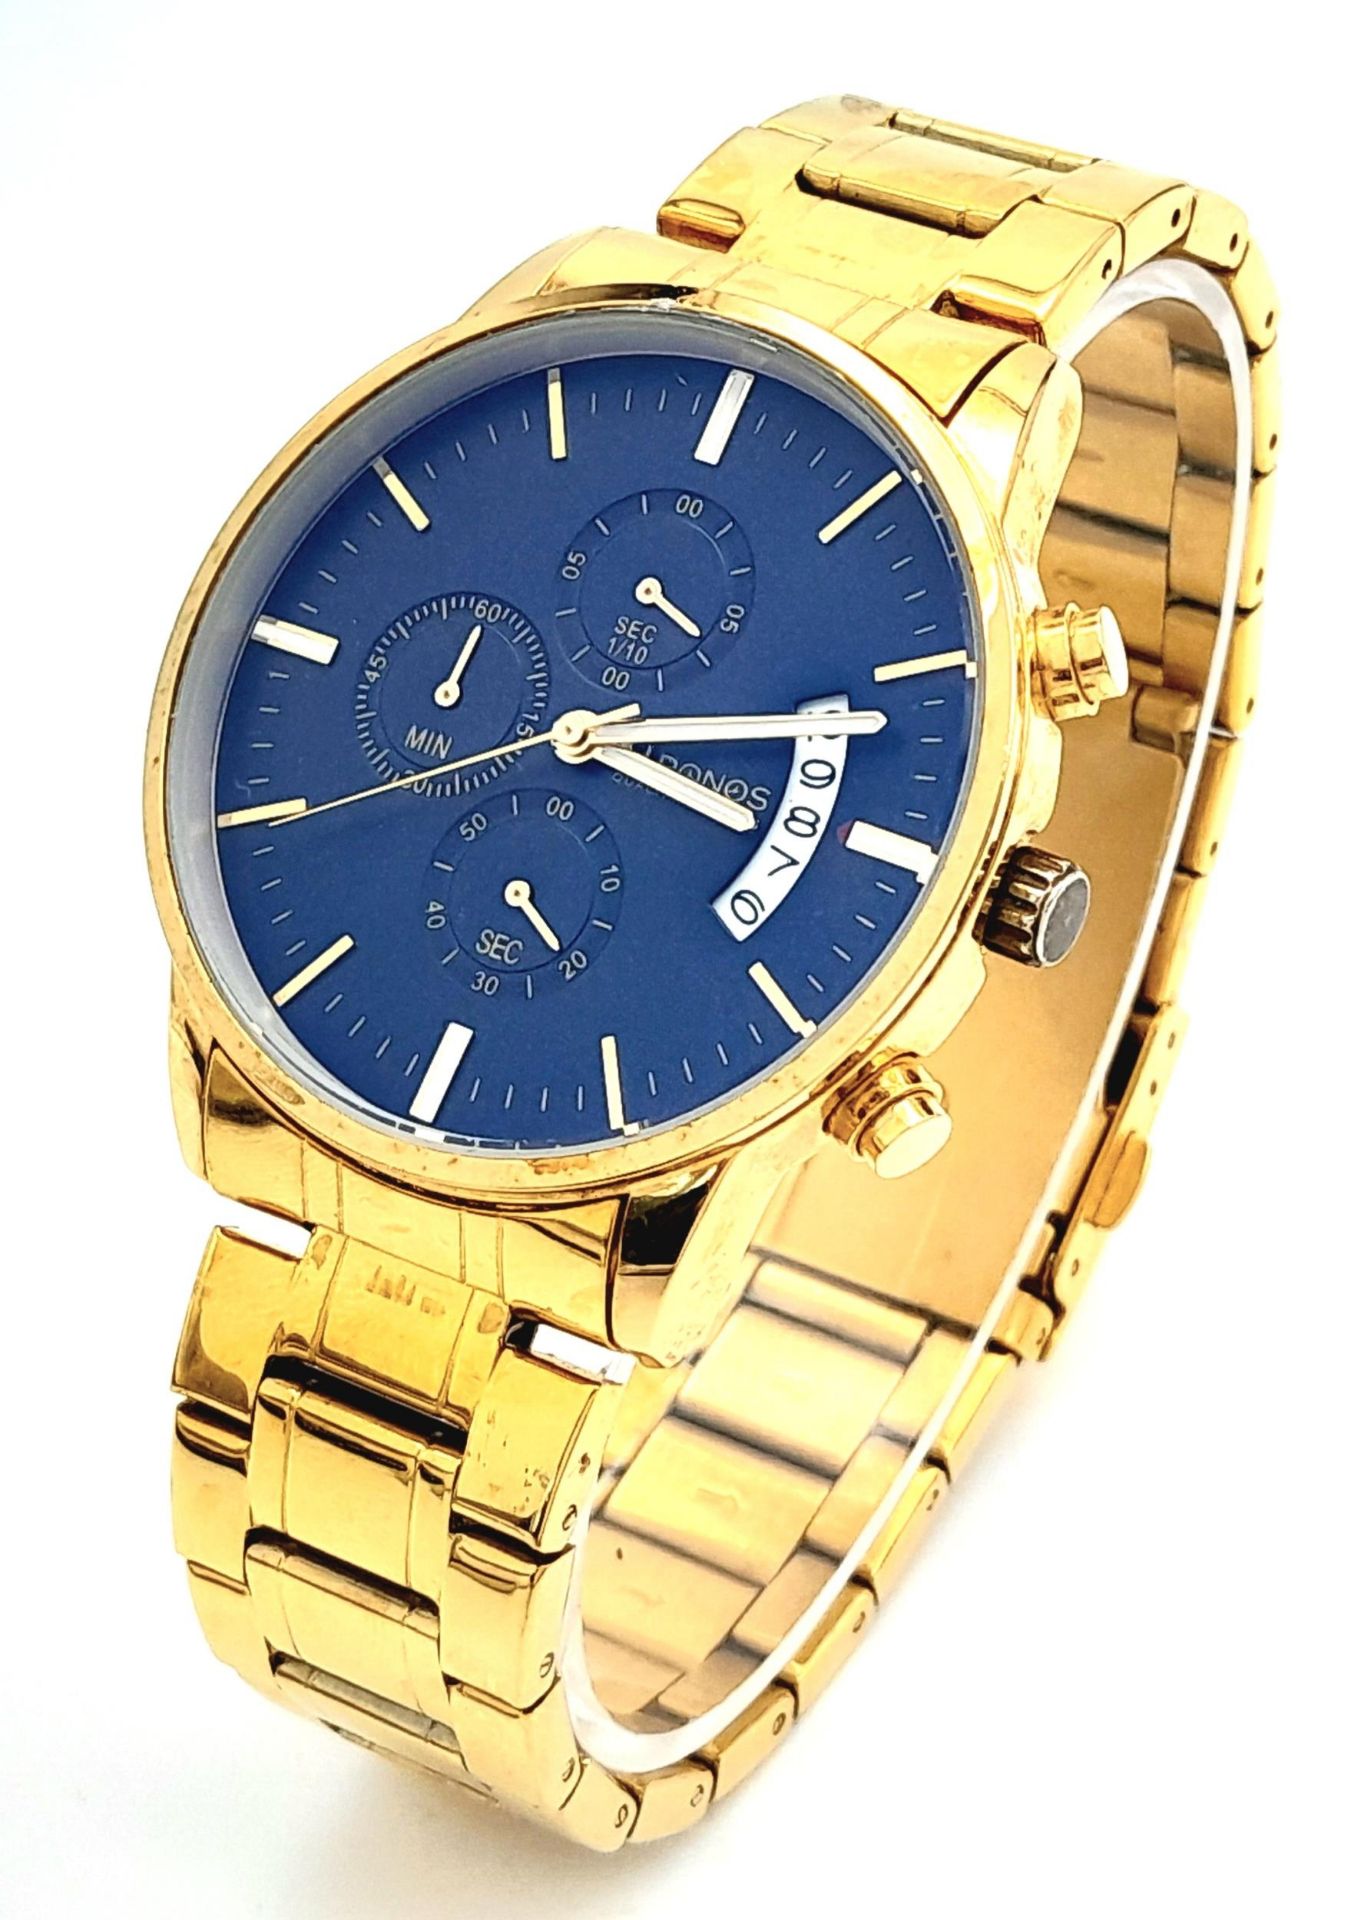 An Excellent Condition Men’s Gold Tone Japanese Sports Chronograph Date Watch by Hronos. 42mm